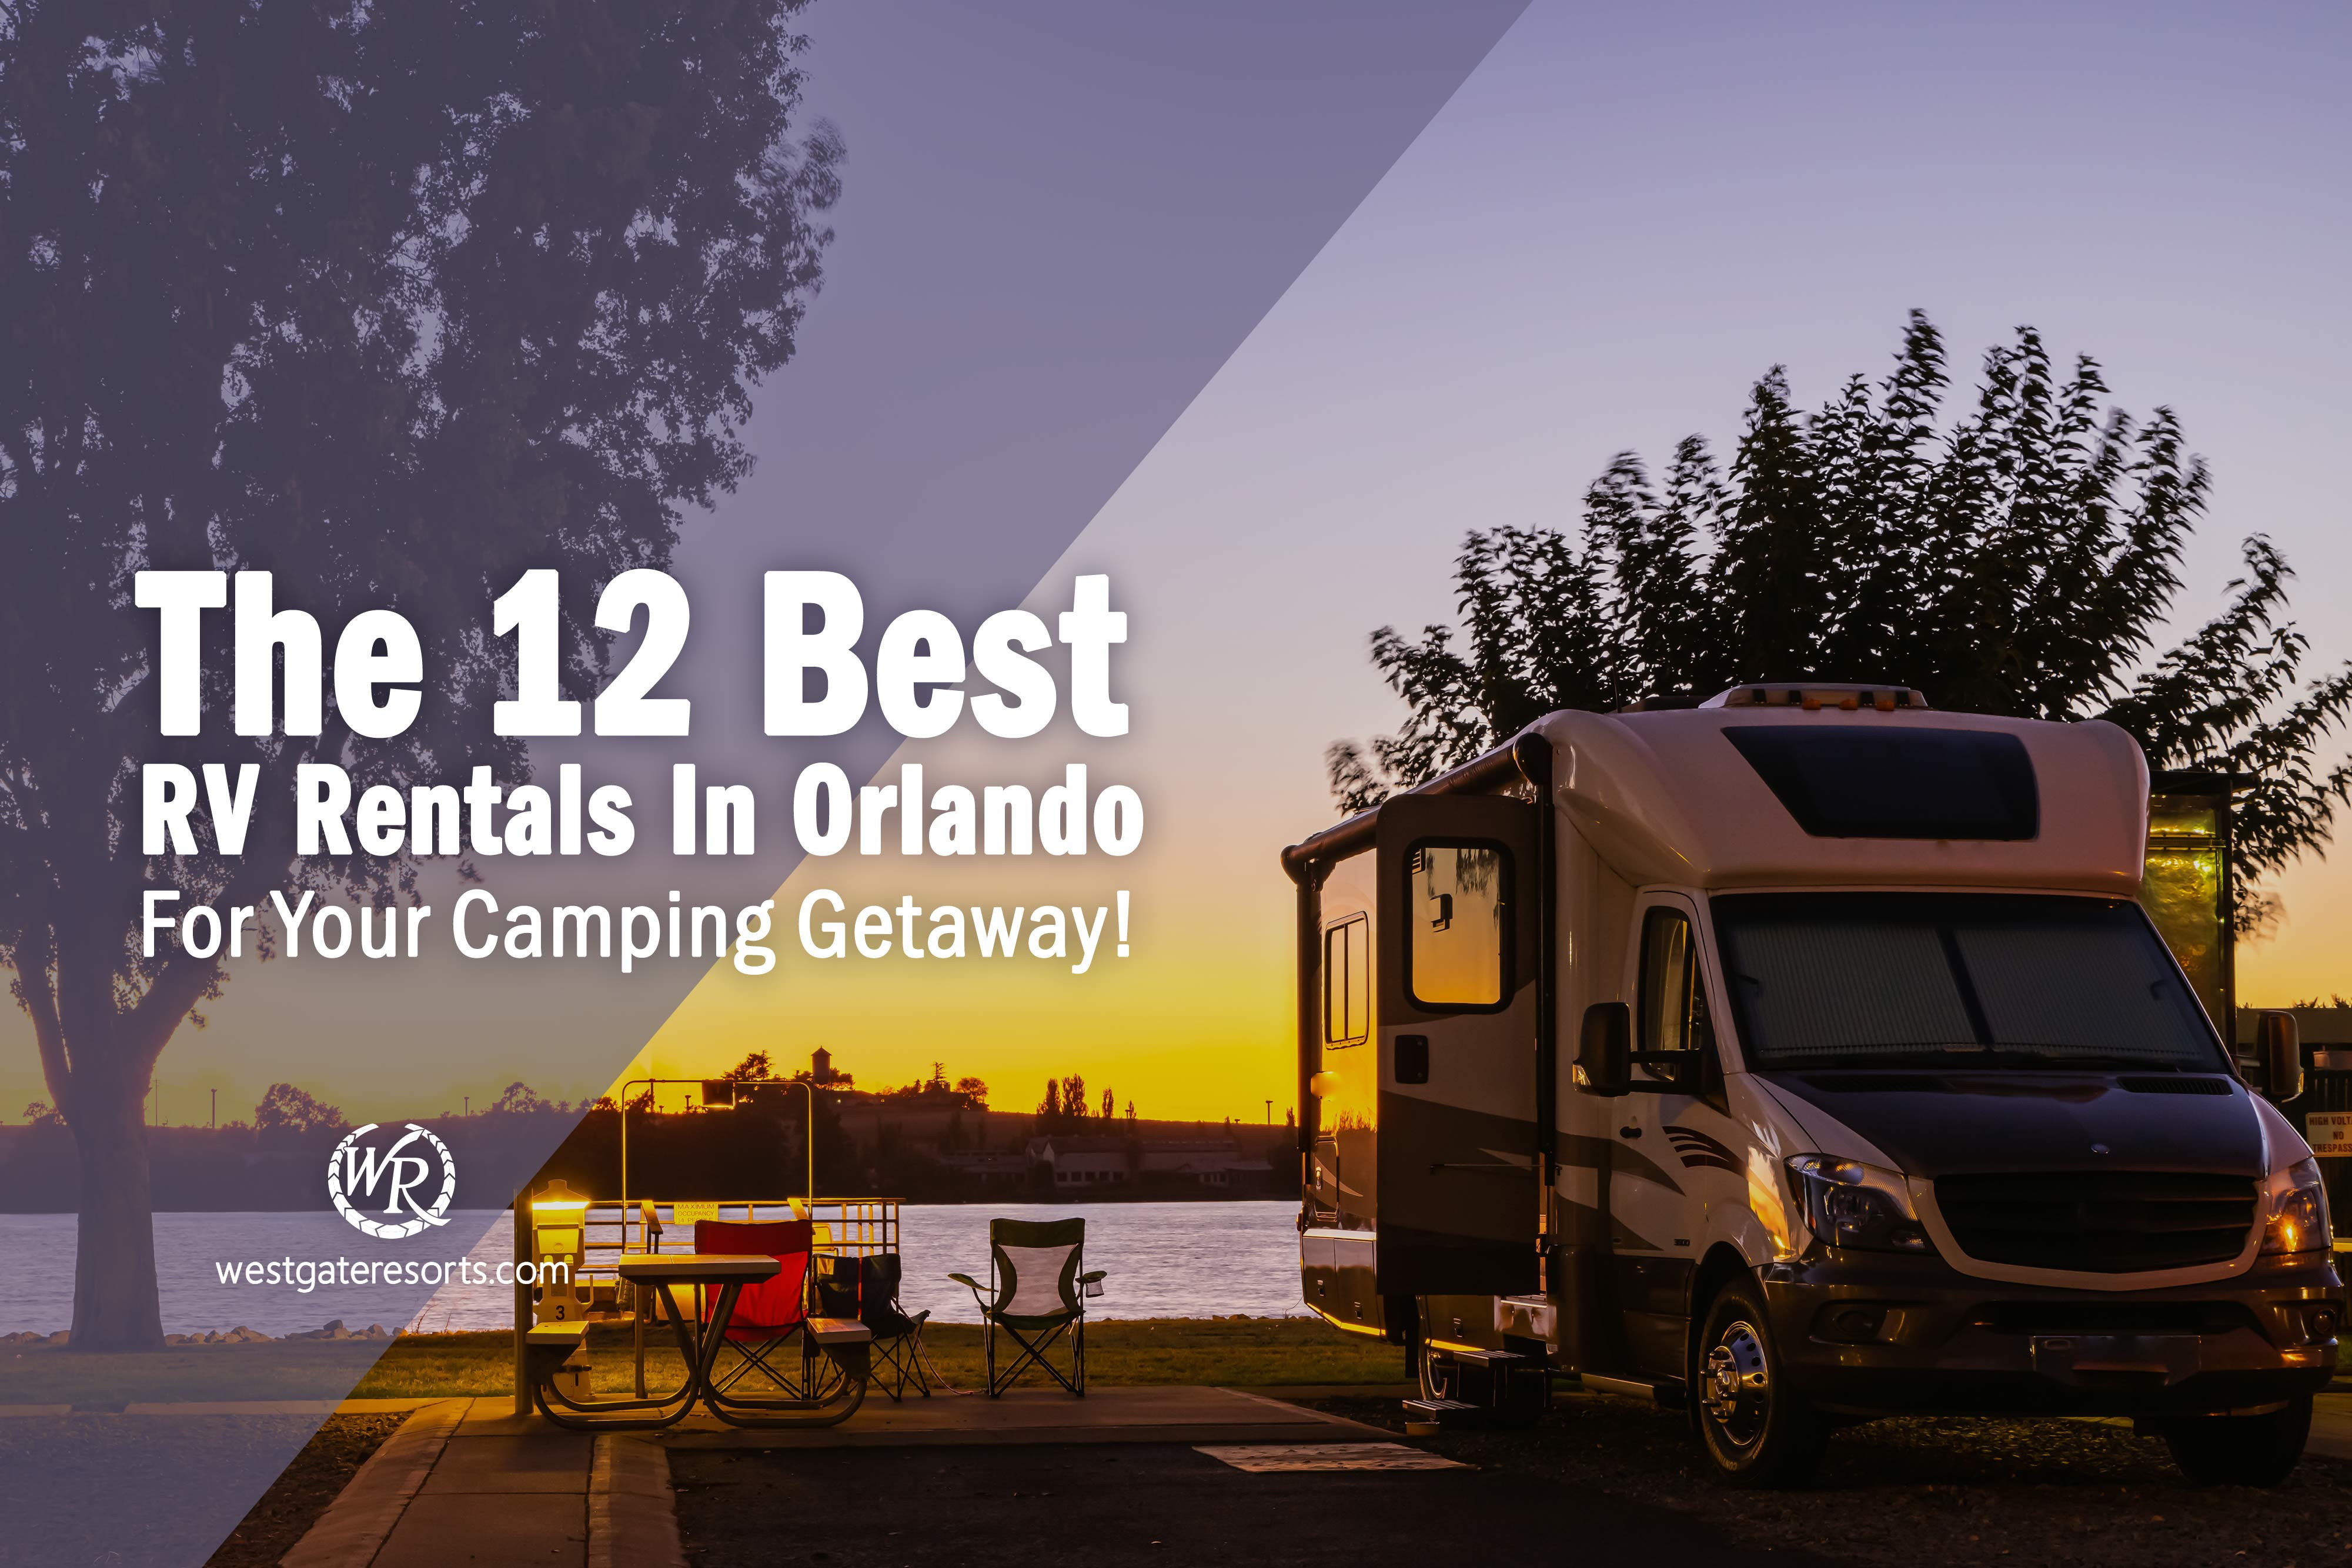 The 12 Best Rv Rentals In Orlando For Your Camping Getaway